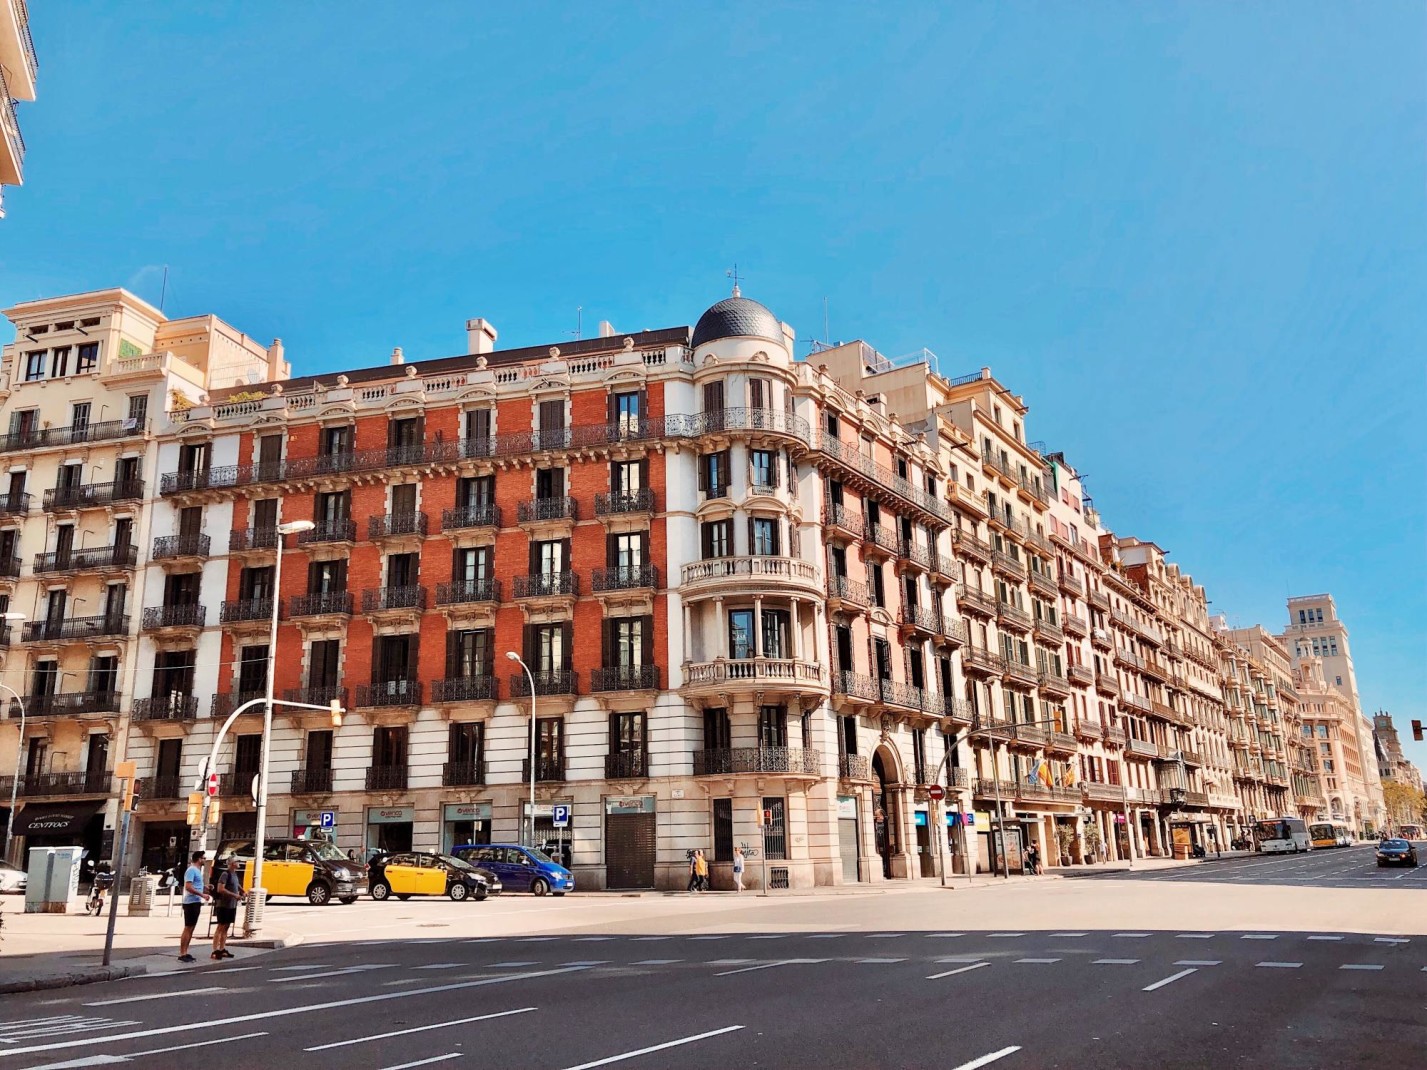 Historical buildings on street with few people and cars in Barcelona on clear day.